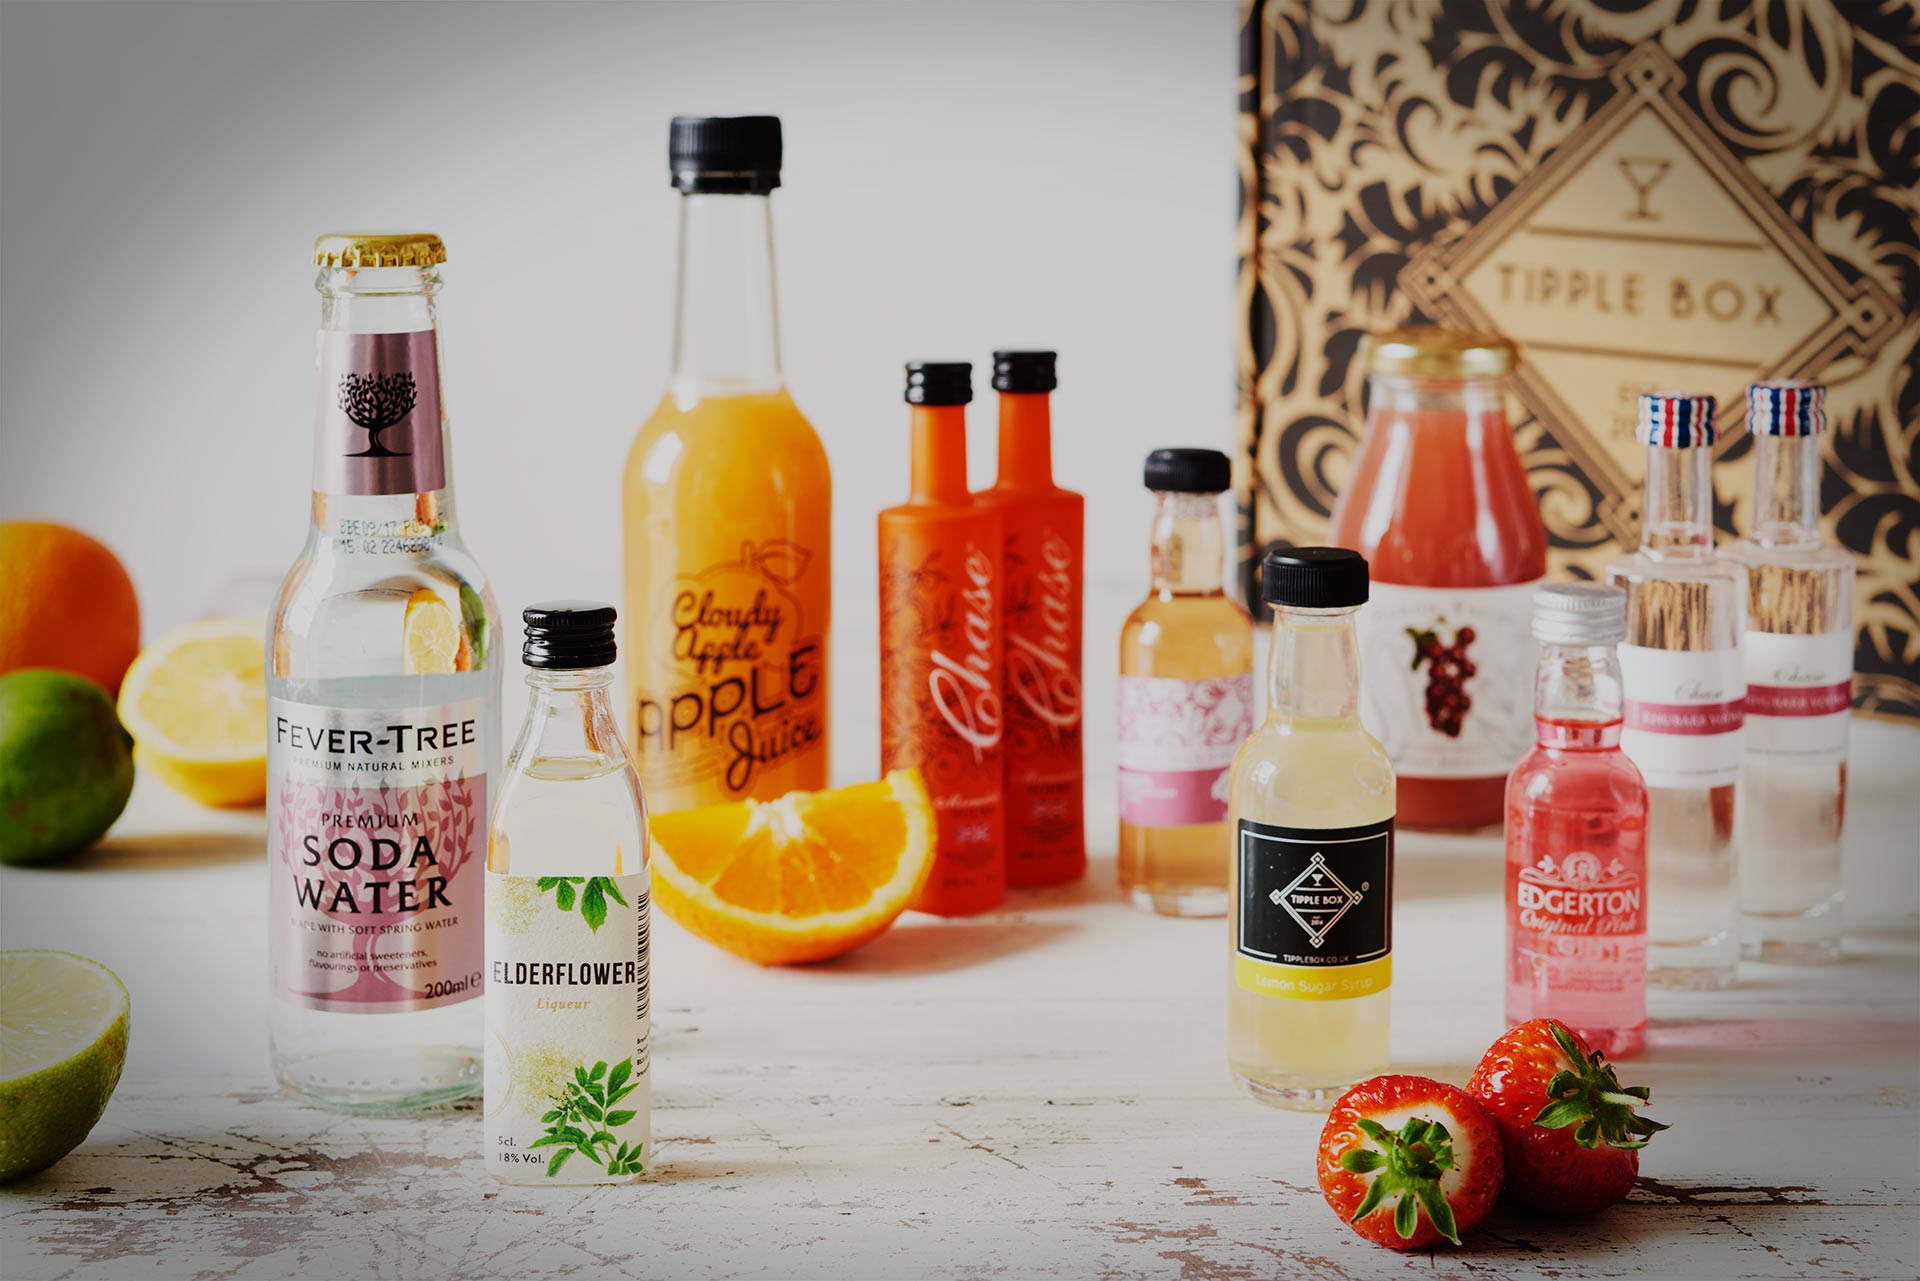 Tipple Box Launches Crowdcube Campaign